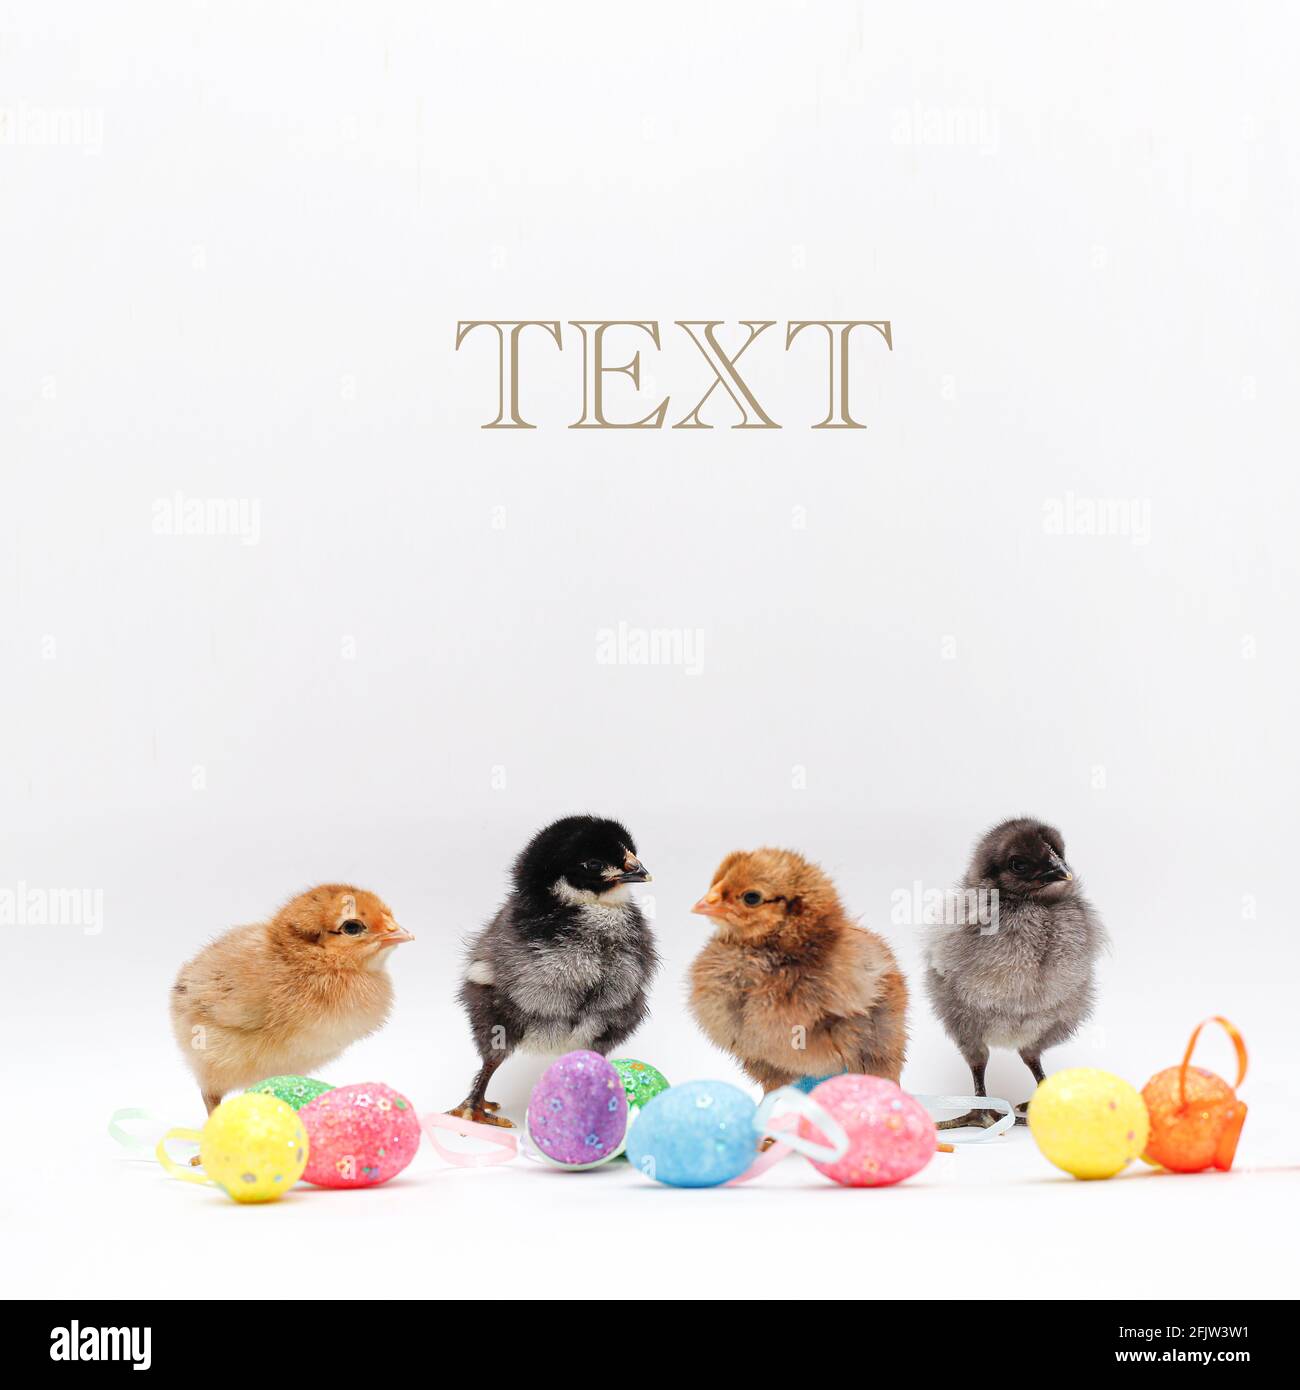 Newborn chickens and Easter colorful eggs. Four chickens of different colors Stock Photo